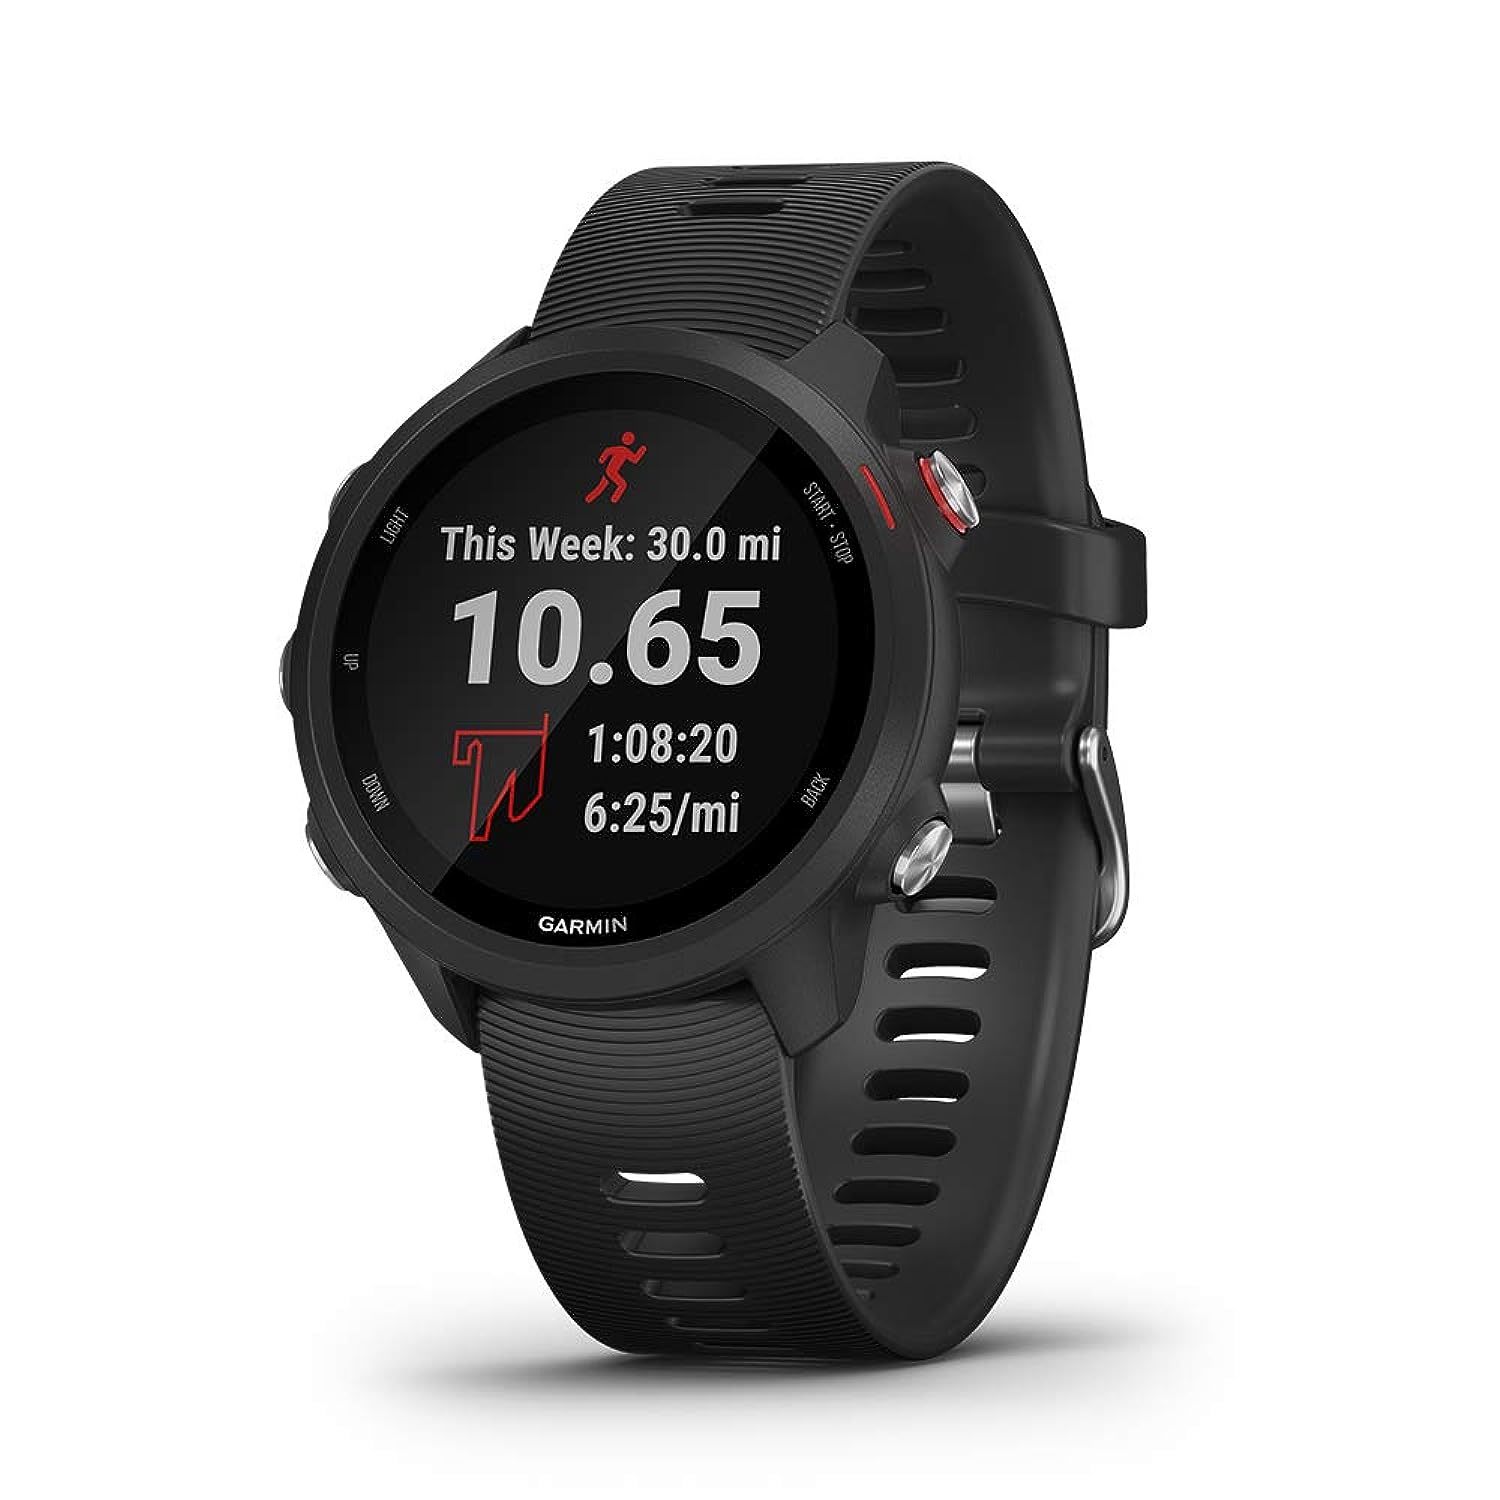 Primary image for Garmin 010-02120-20 Forerunner 245 Music, GPS Running Smartwatch with Music and 